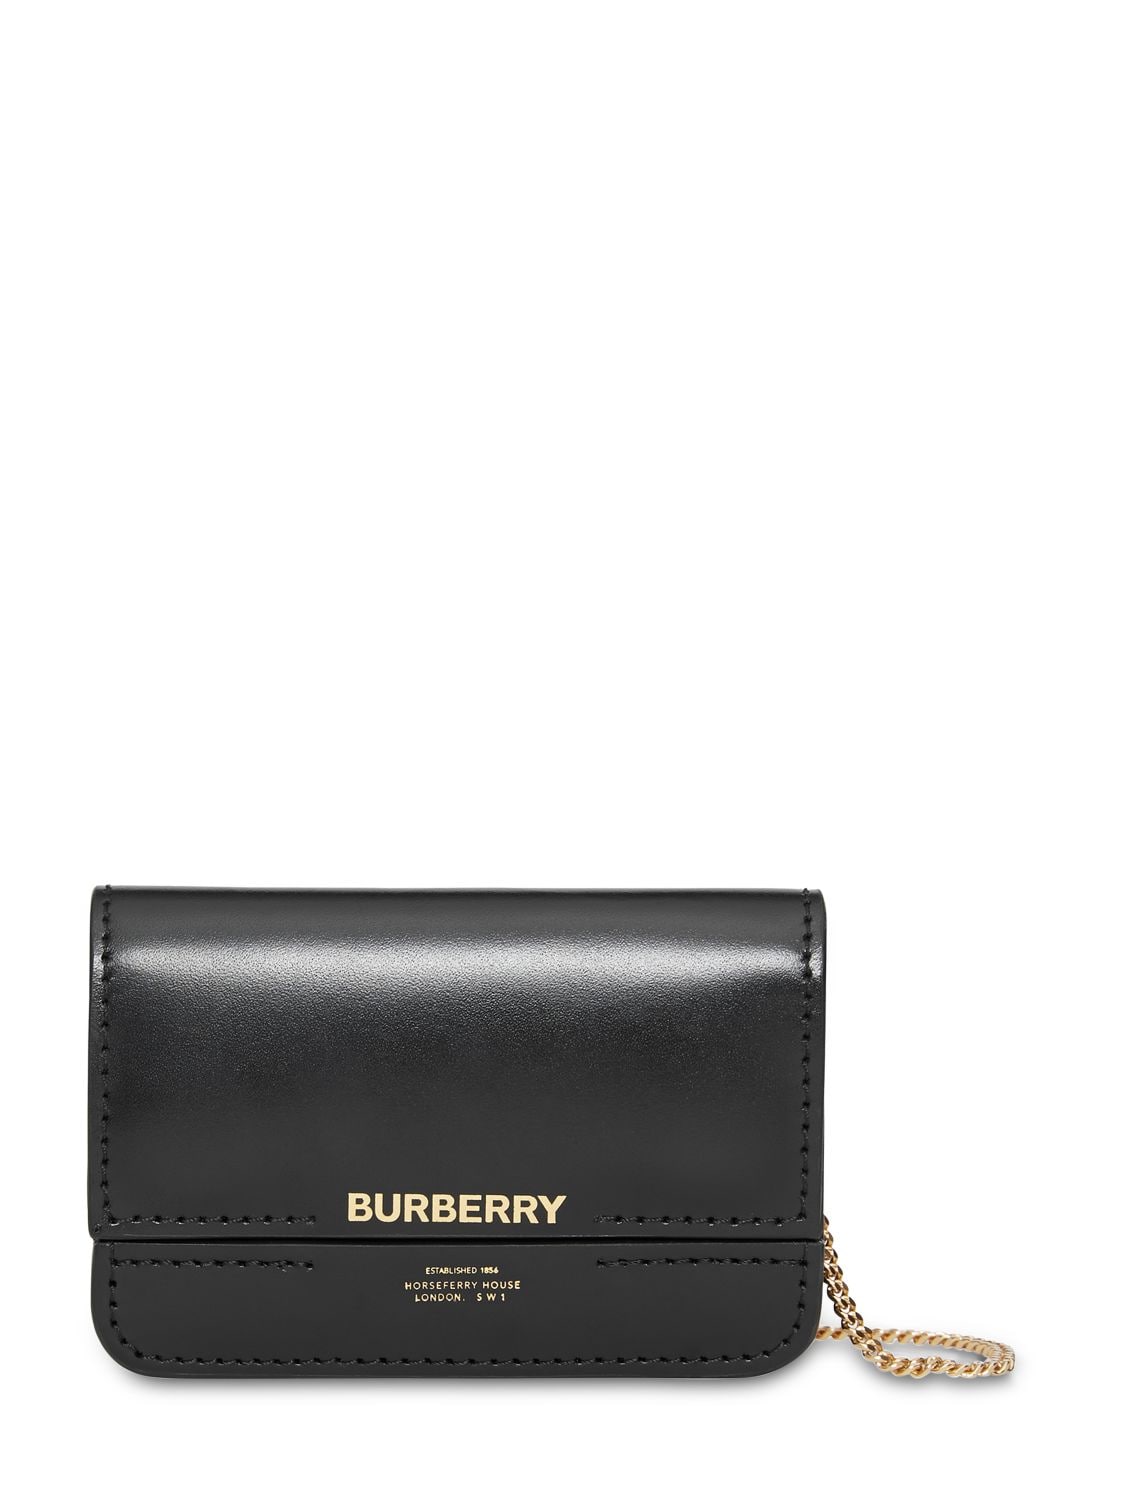 BURBERRY JODY SMOOTH LEATHER WALLET CHAIN,71ID1H053-QTEXODK1